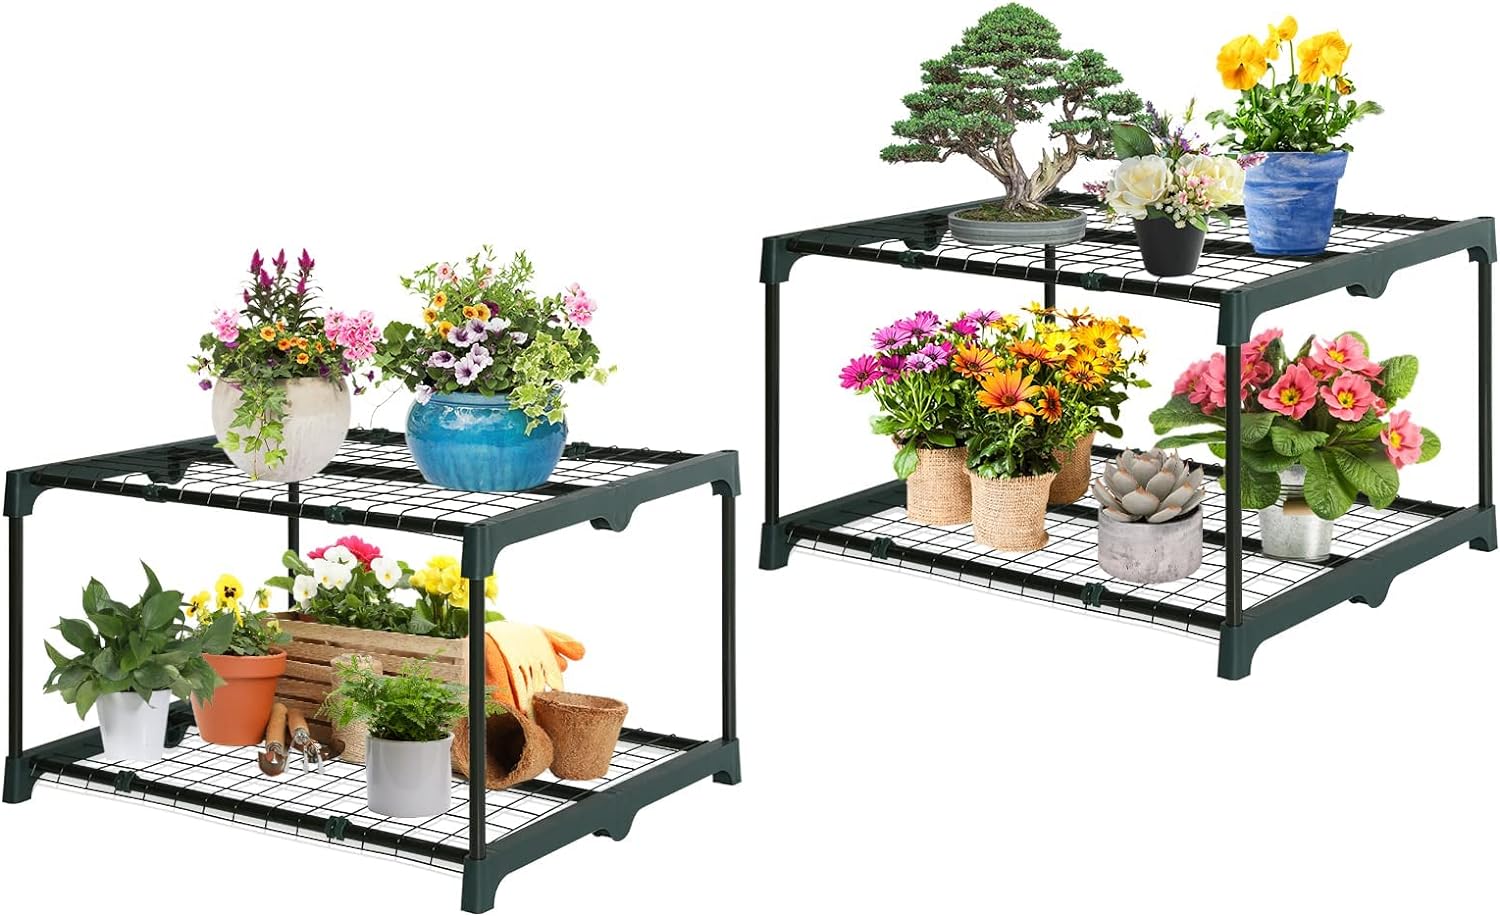 EAGLE PEAK Greenhouse Shelving Staging Double 4 Tier, Outdoor/Indoor Plant Shelves, 35x12x42, Green